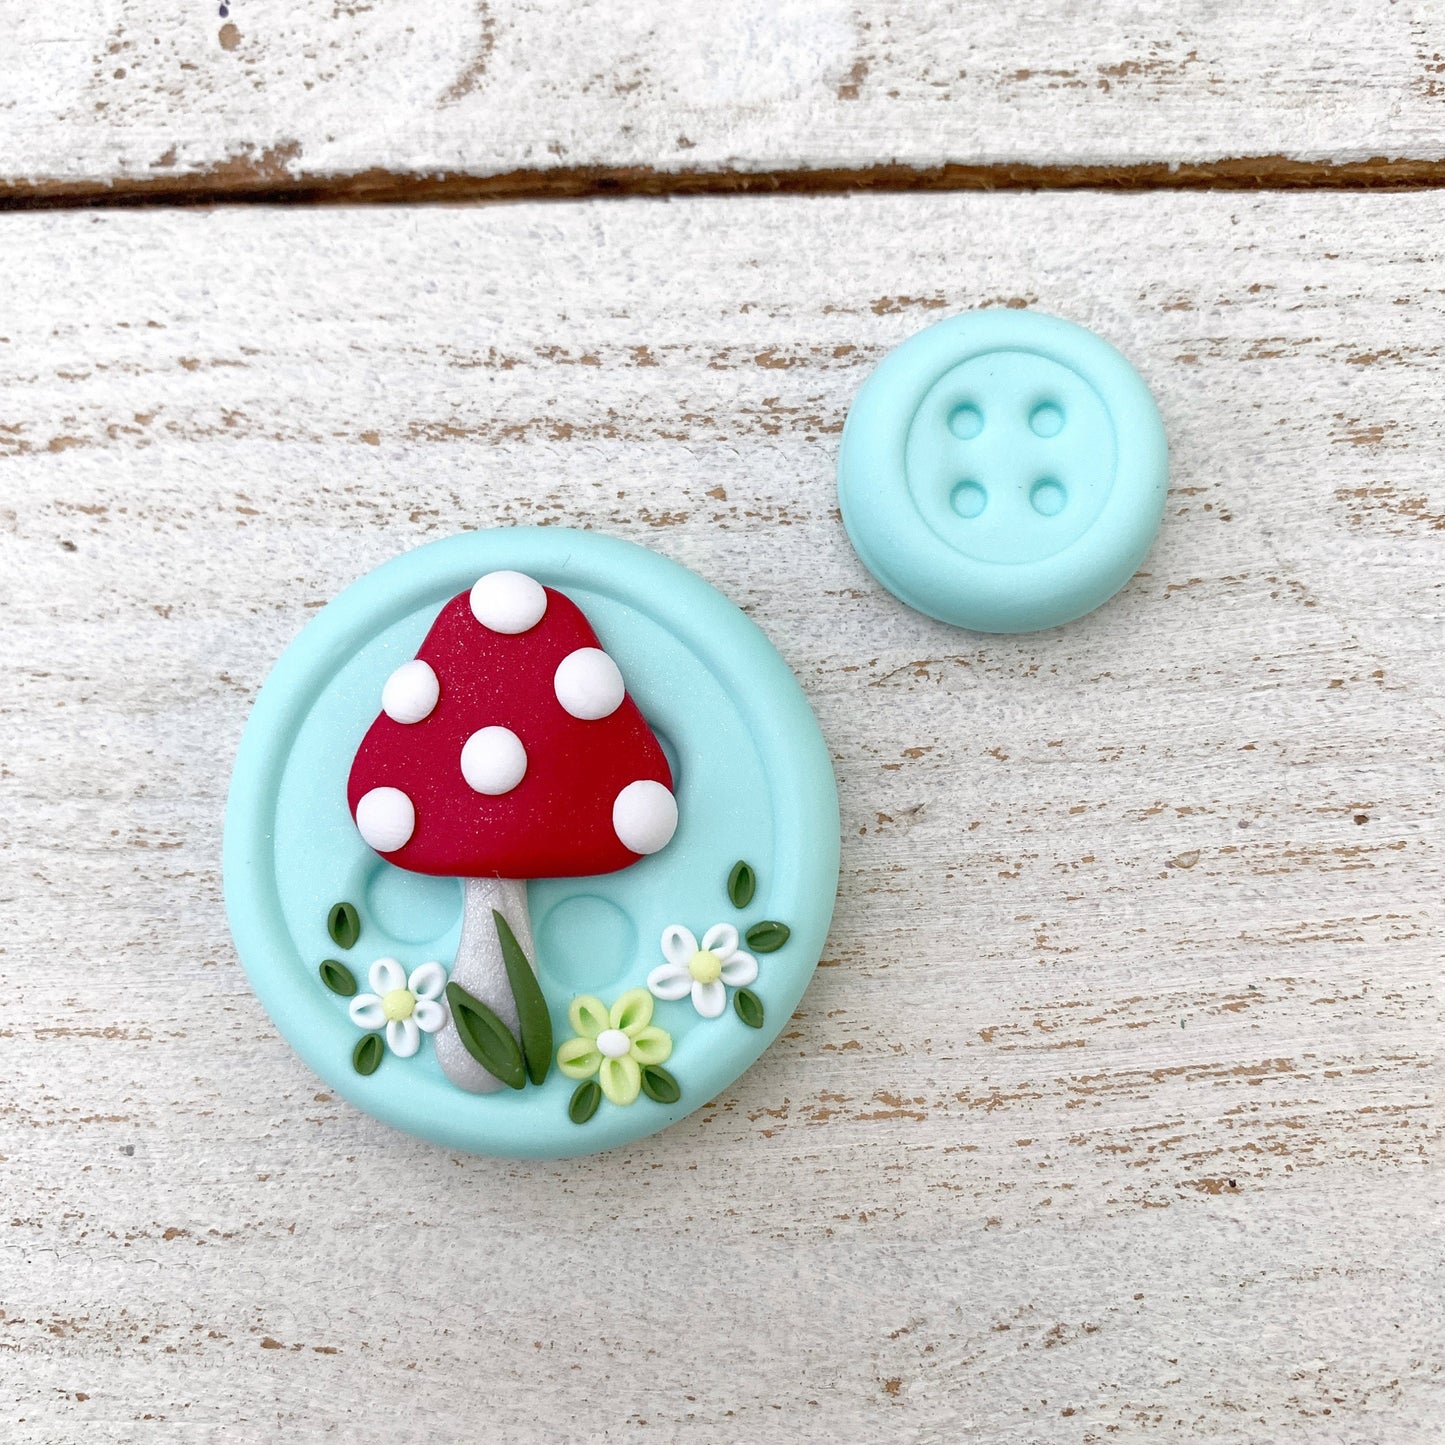 Mint mushroom needle minder, needle keeper, sewing accessories, spotty toadstool, magnetic button needle holder